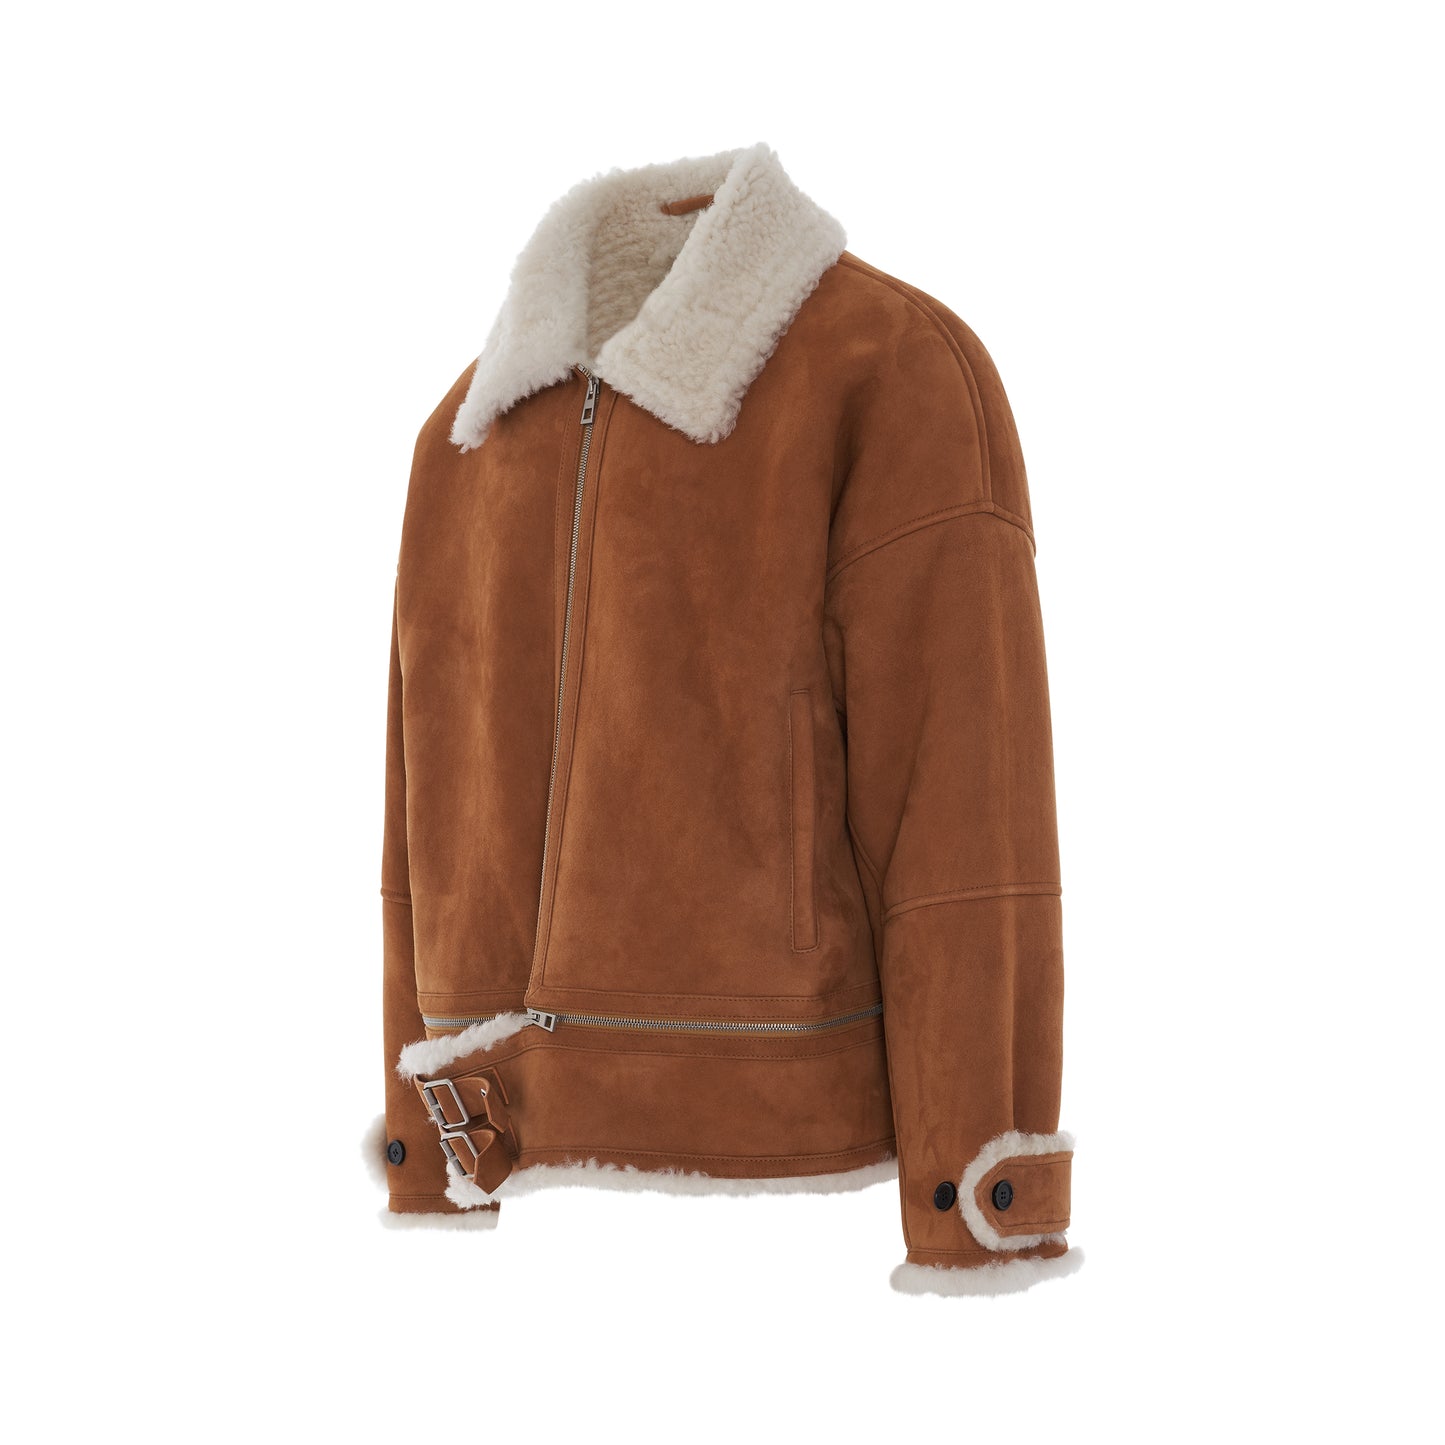 Shearling Zipped Jacket in White/Camel